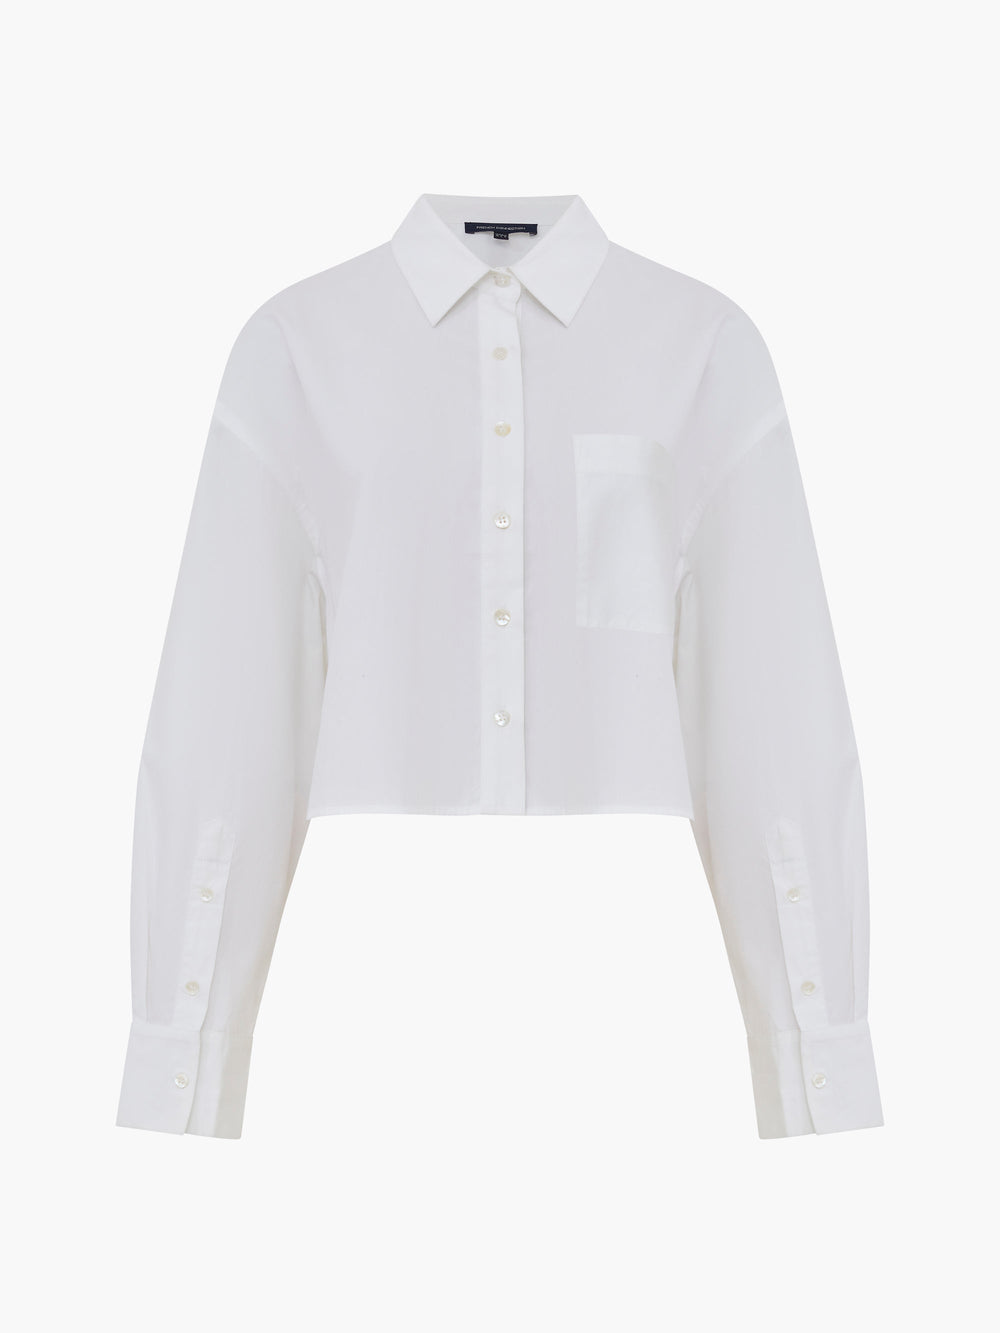 Crystal Alissa Cropped Cotton Shirt | French Connection EU